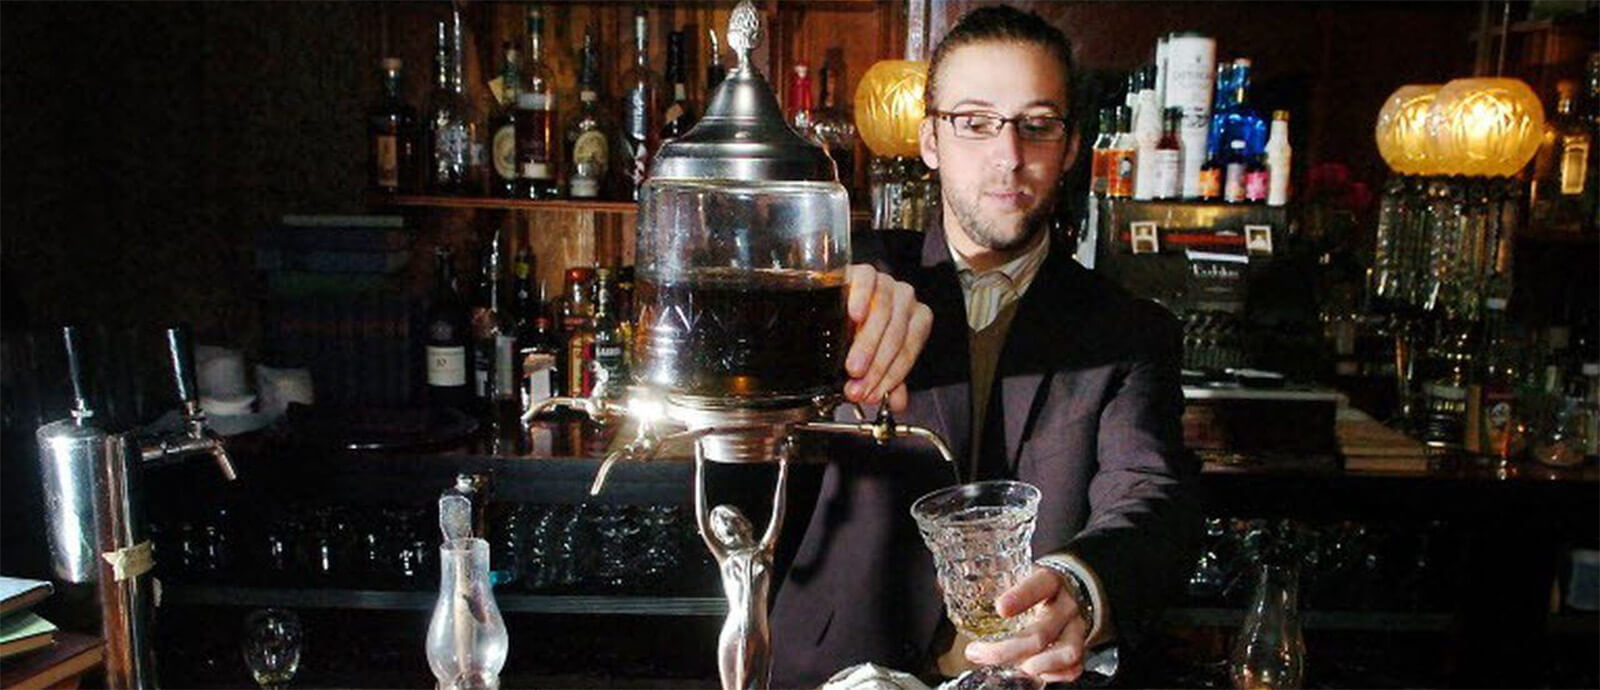 A man in a black suit jacket pours a drink into a crystal glass from an ornate liquor dispenser in front of a fully stocked bar.